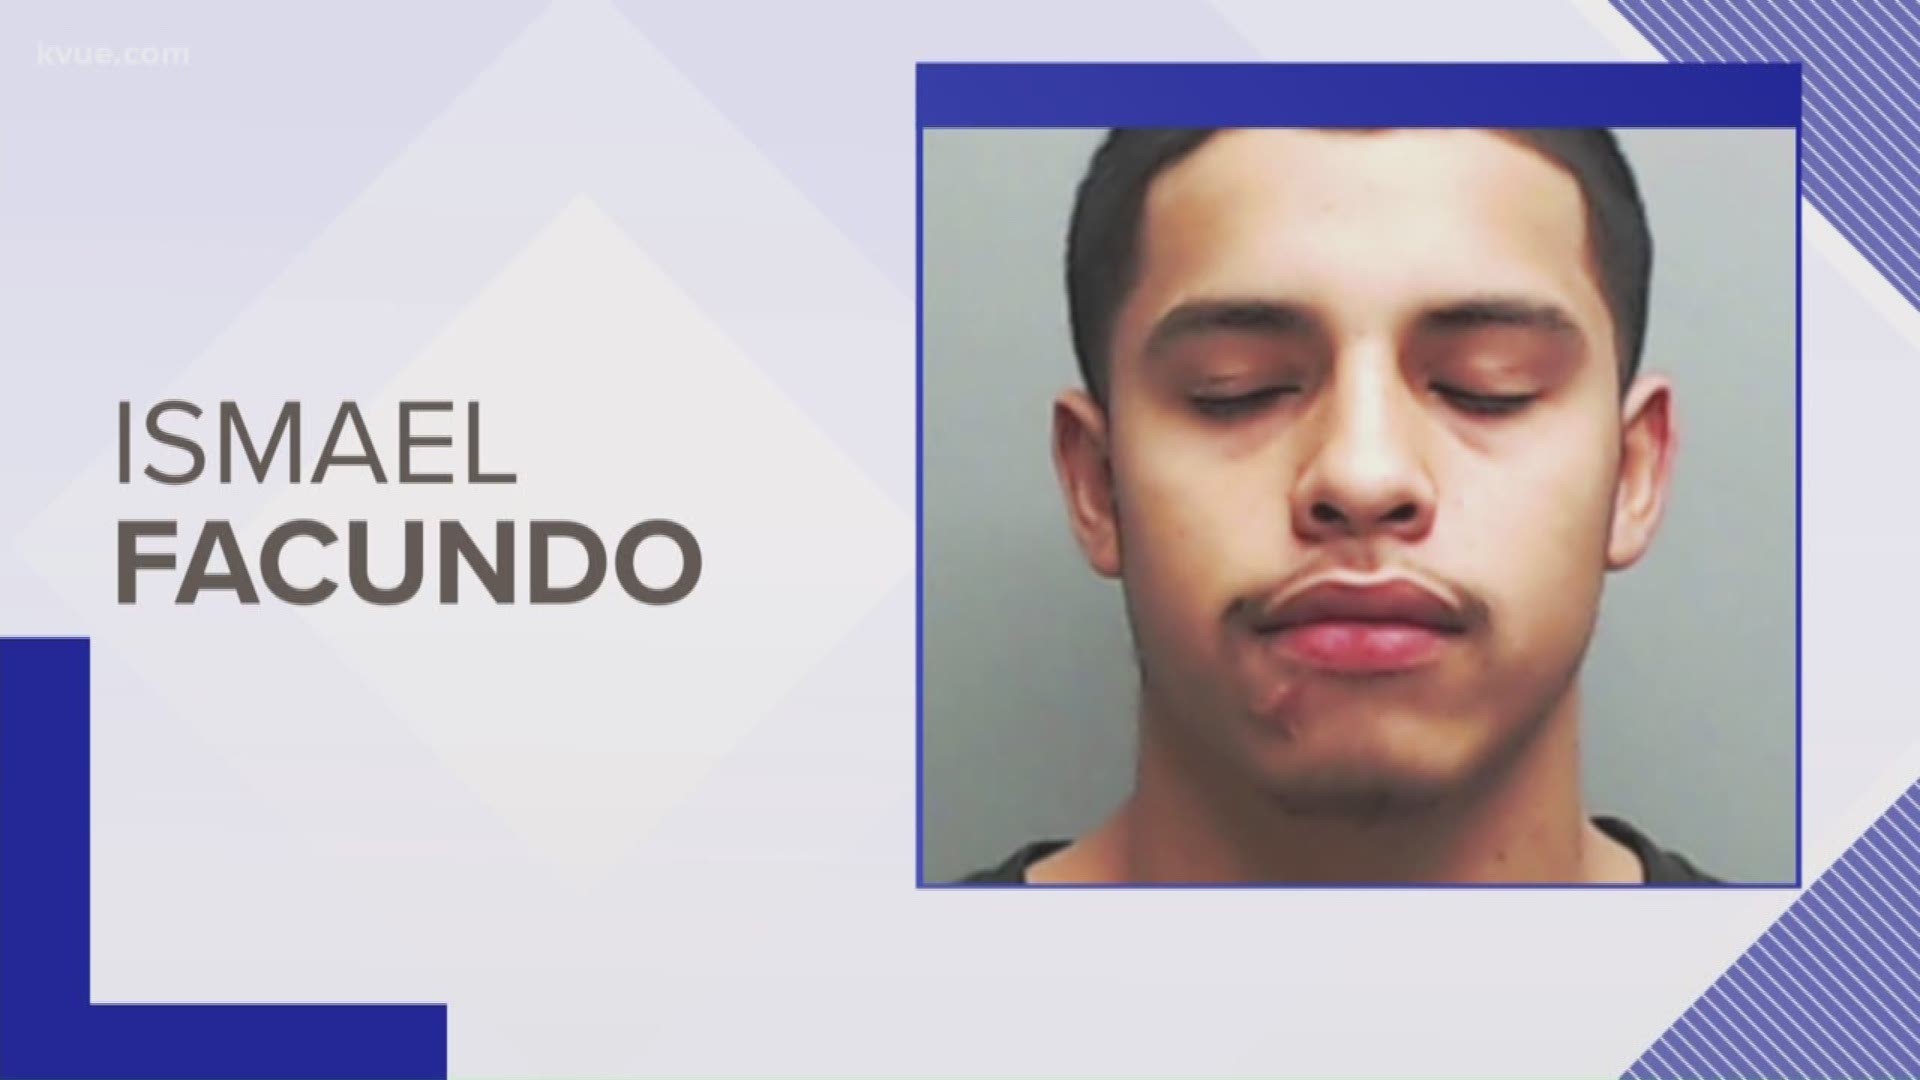 Have you seen this man? Police said Ismael Facundo isn't in custody, but he is charged with aggravated assault with a deadly weapon.